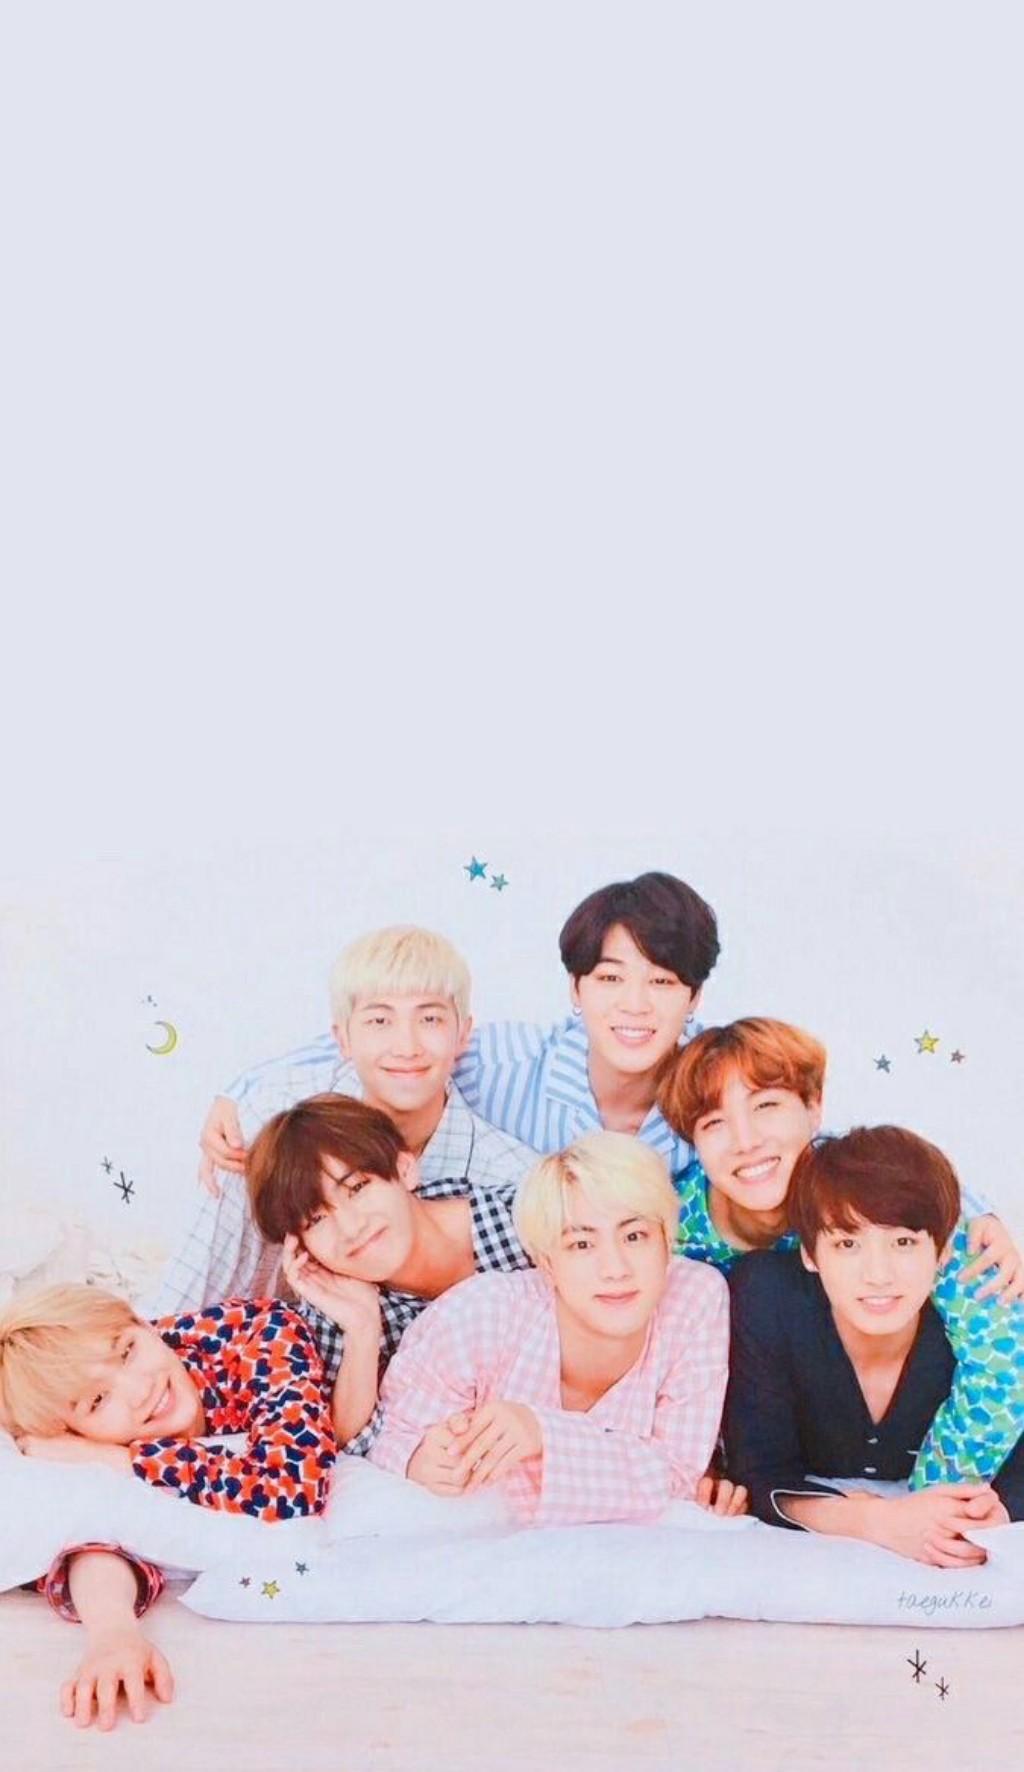 BTS 2020 Android Wallpapers - Wallpaper Cave